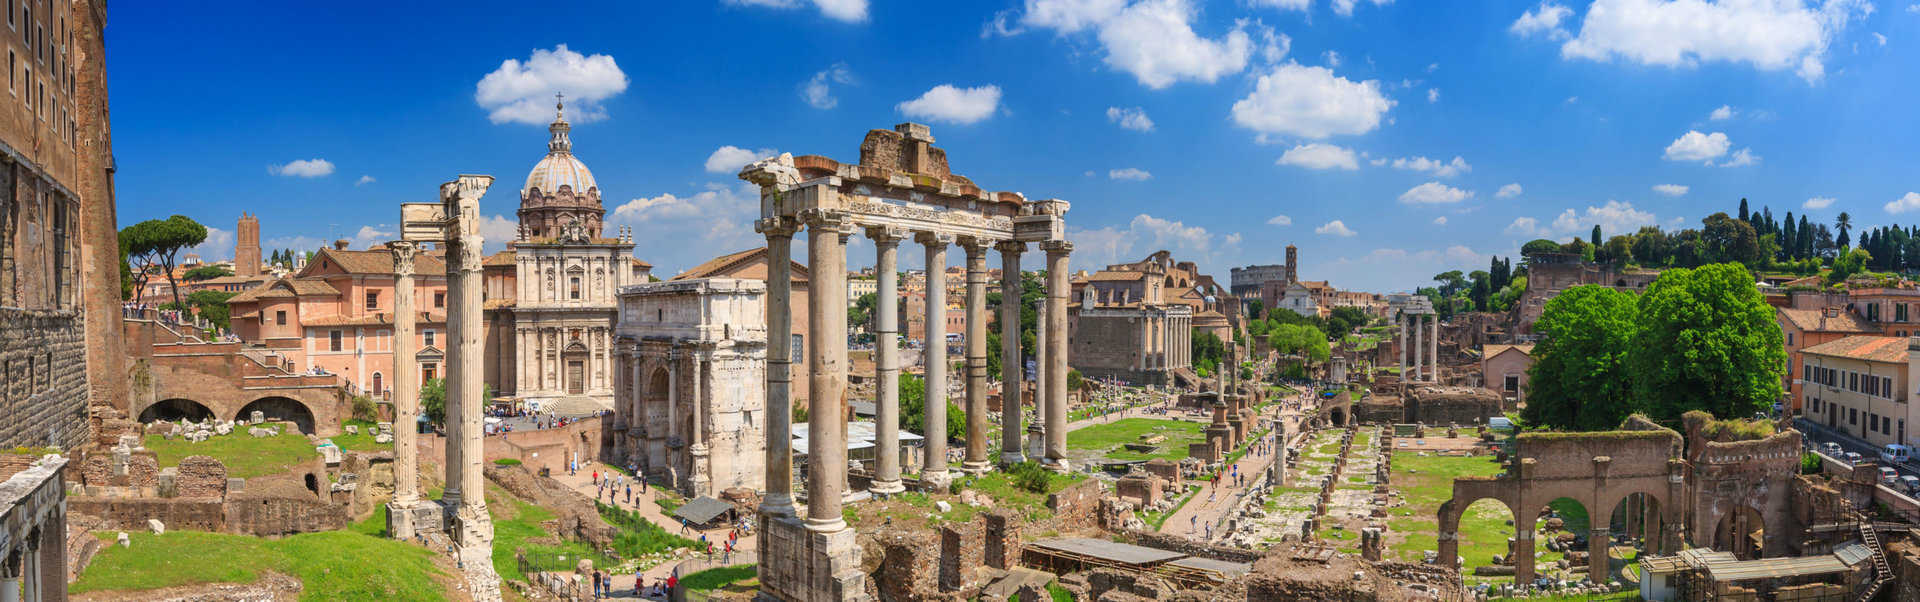 roman forum scaled The Roman Empire was one of the most influential civilisations in the world. The ideas and culture of ancient Rome influence so much of our lives today.